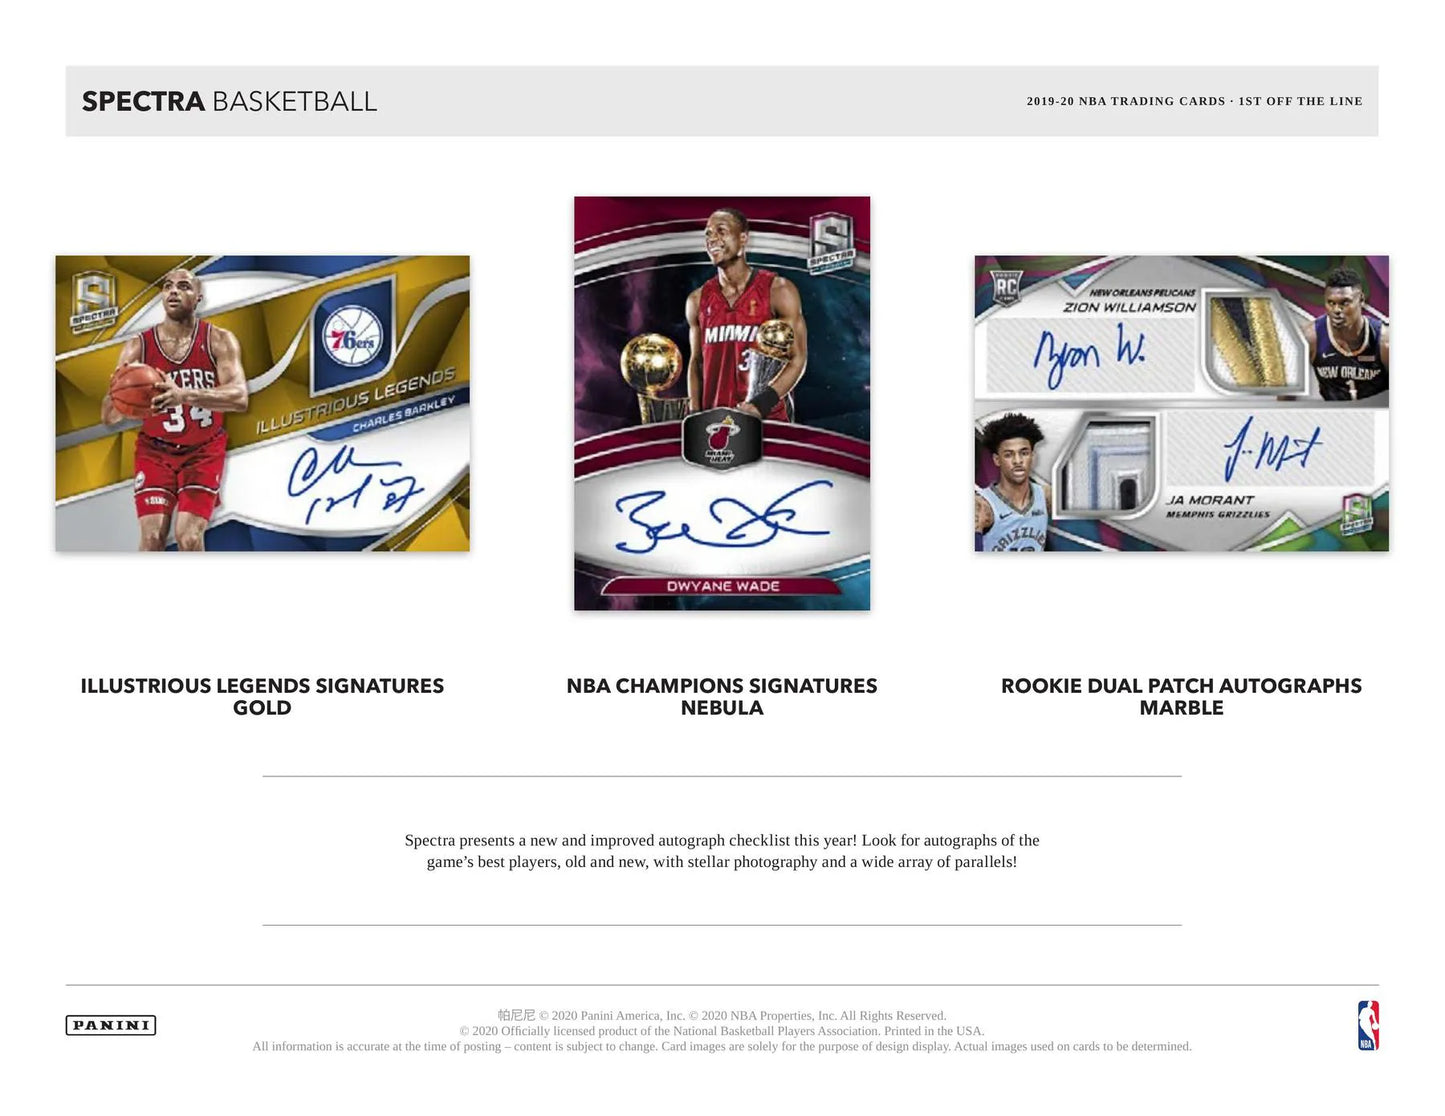 2019/20 Panini Spectra Basketball 1st Off The Line Hobby Box